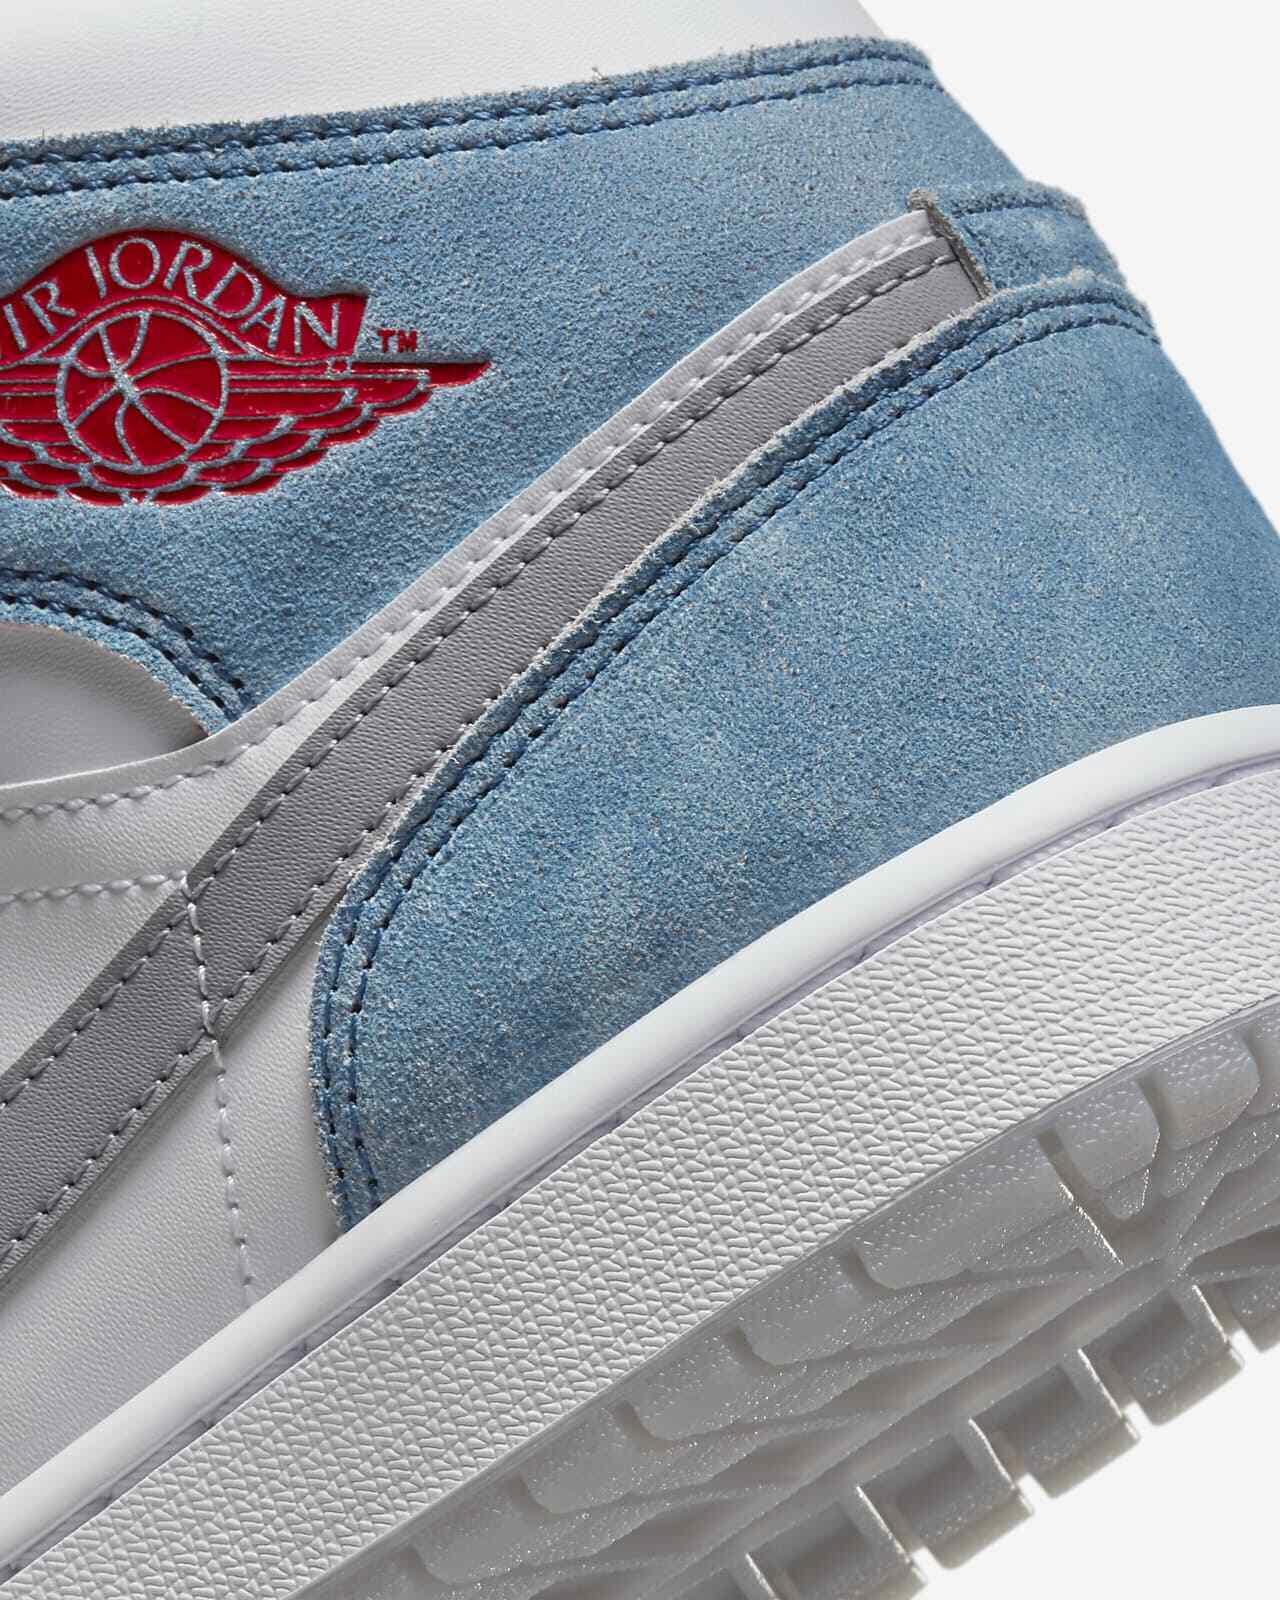 Nike Air Jordan 1 Mid SE French Blue Fire Red [US 7-12] DN3706-401 New